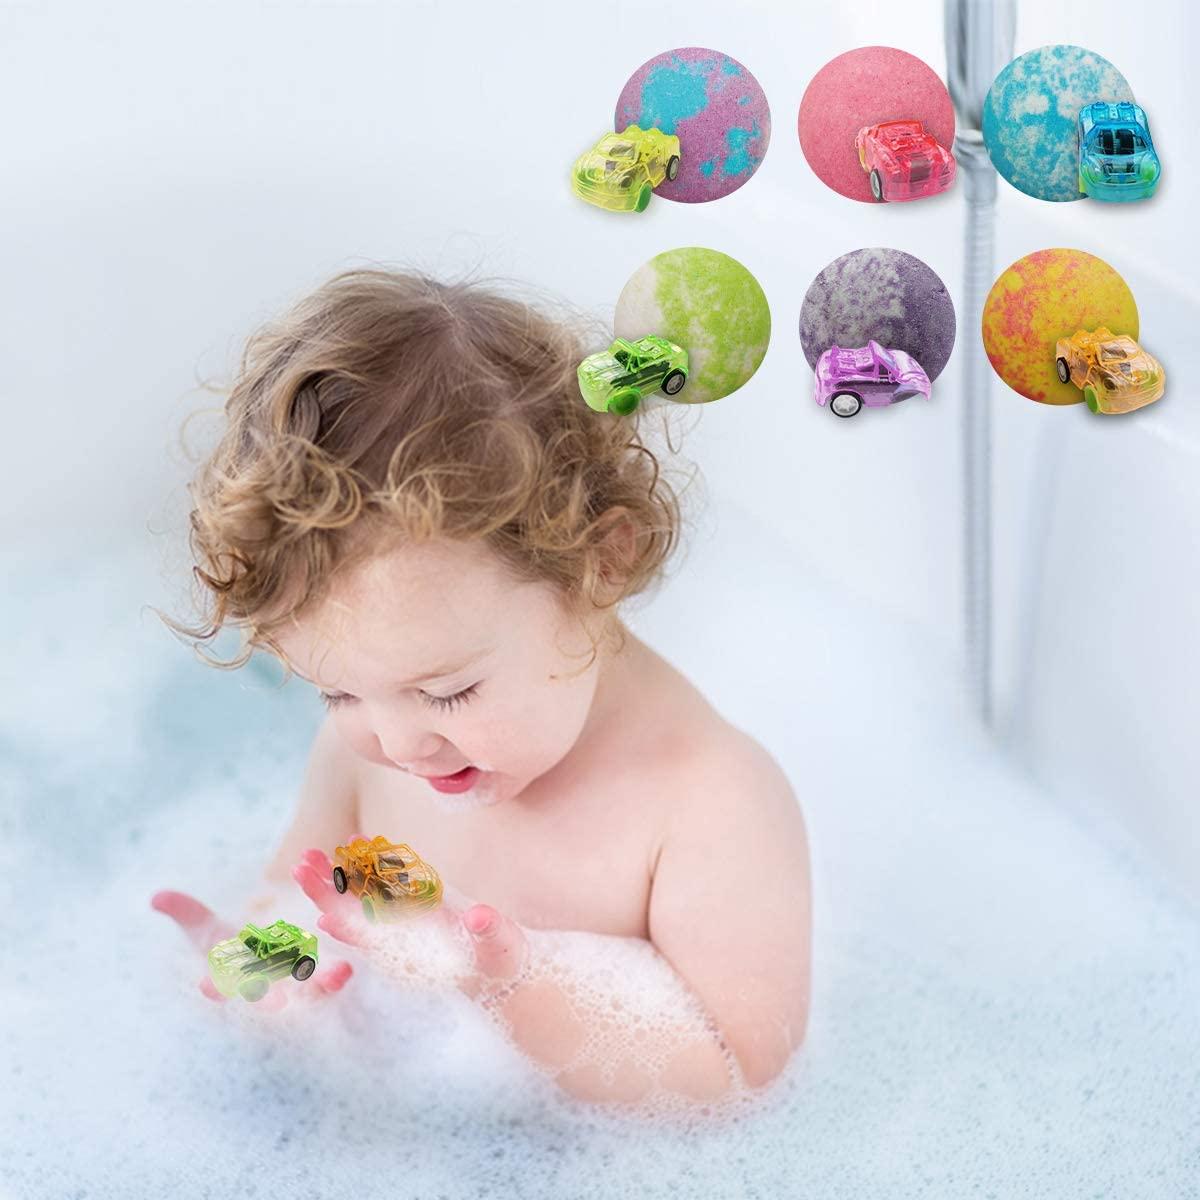 Mold-Free Bath Toys Fishing Games for Toddlers Malaysia